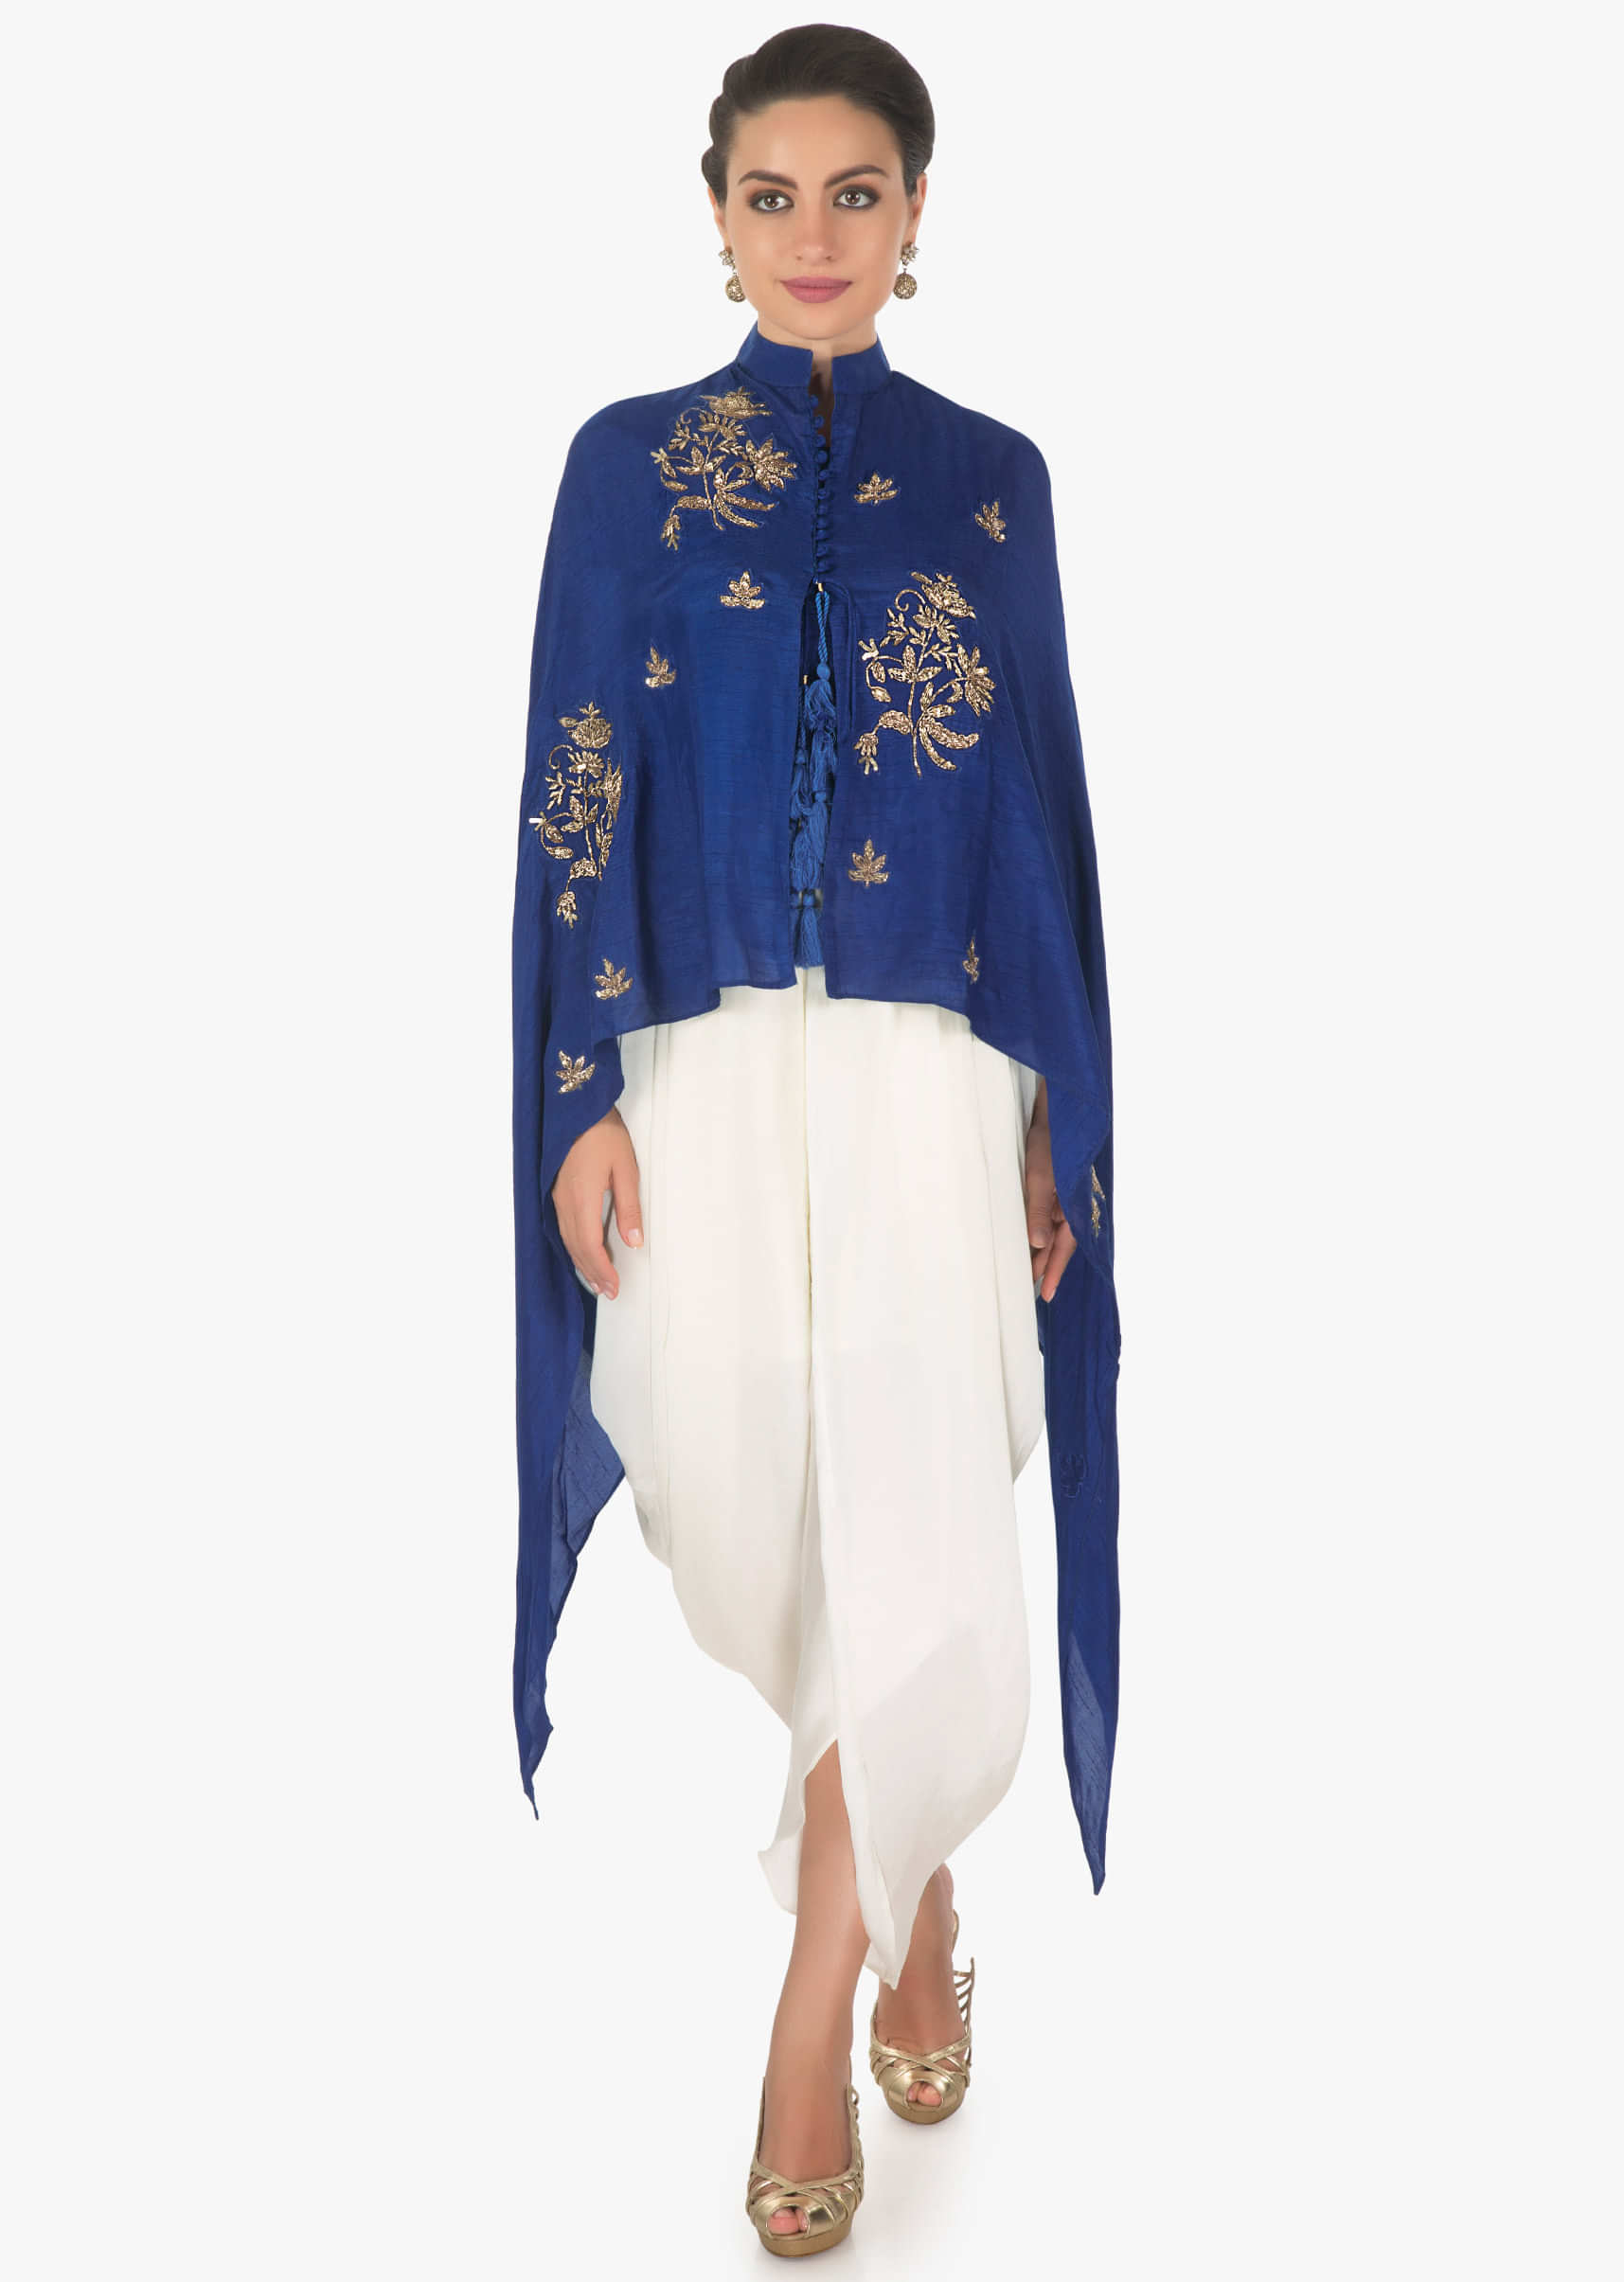 Royal Blue Crop Top In Raw Silk With A Cape Jacket Matched With Fancy Dhoti Pants